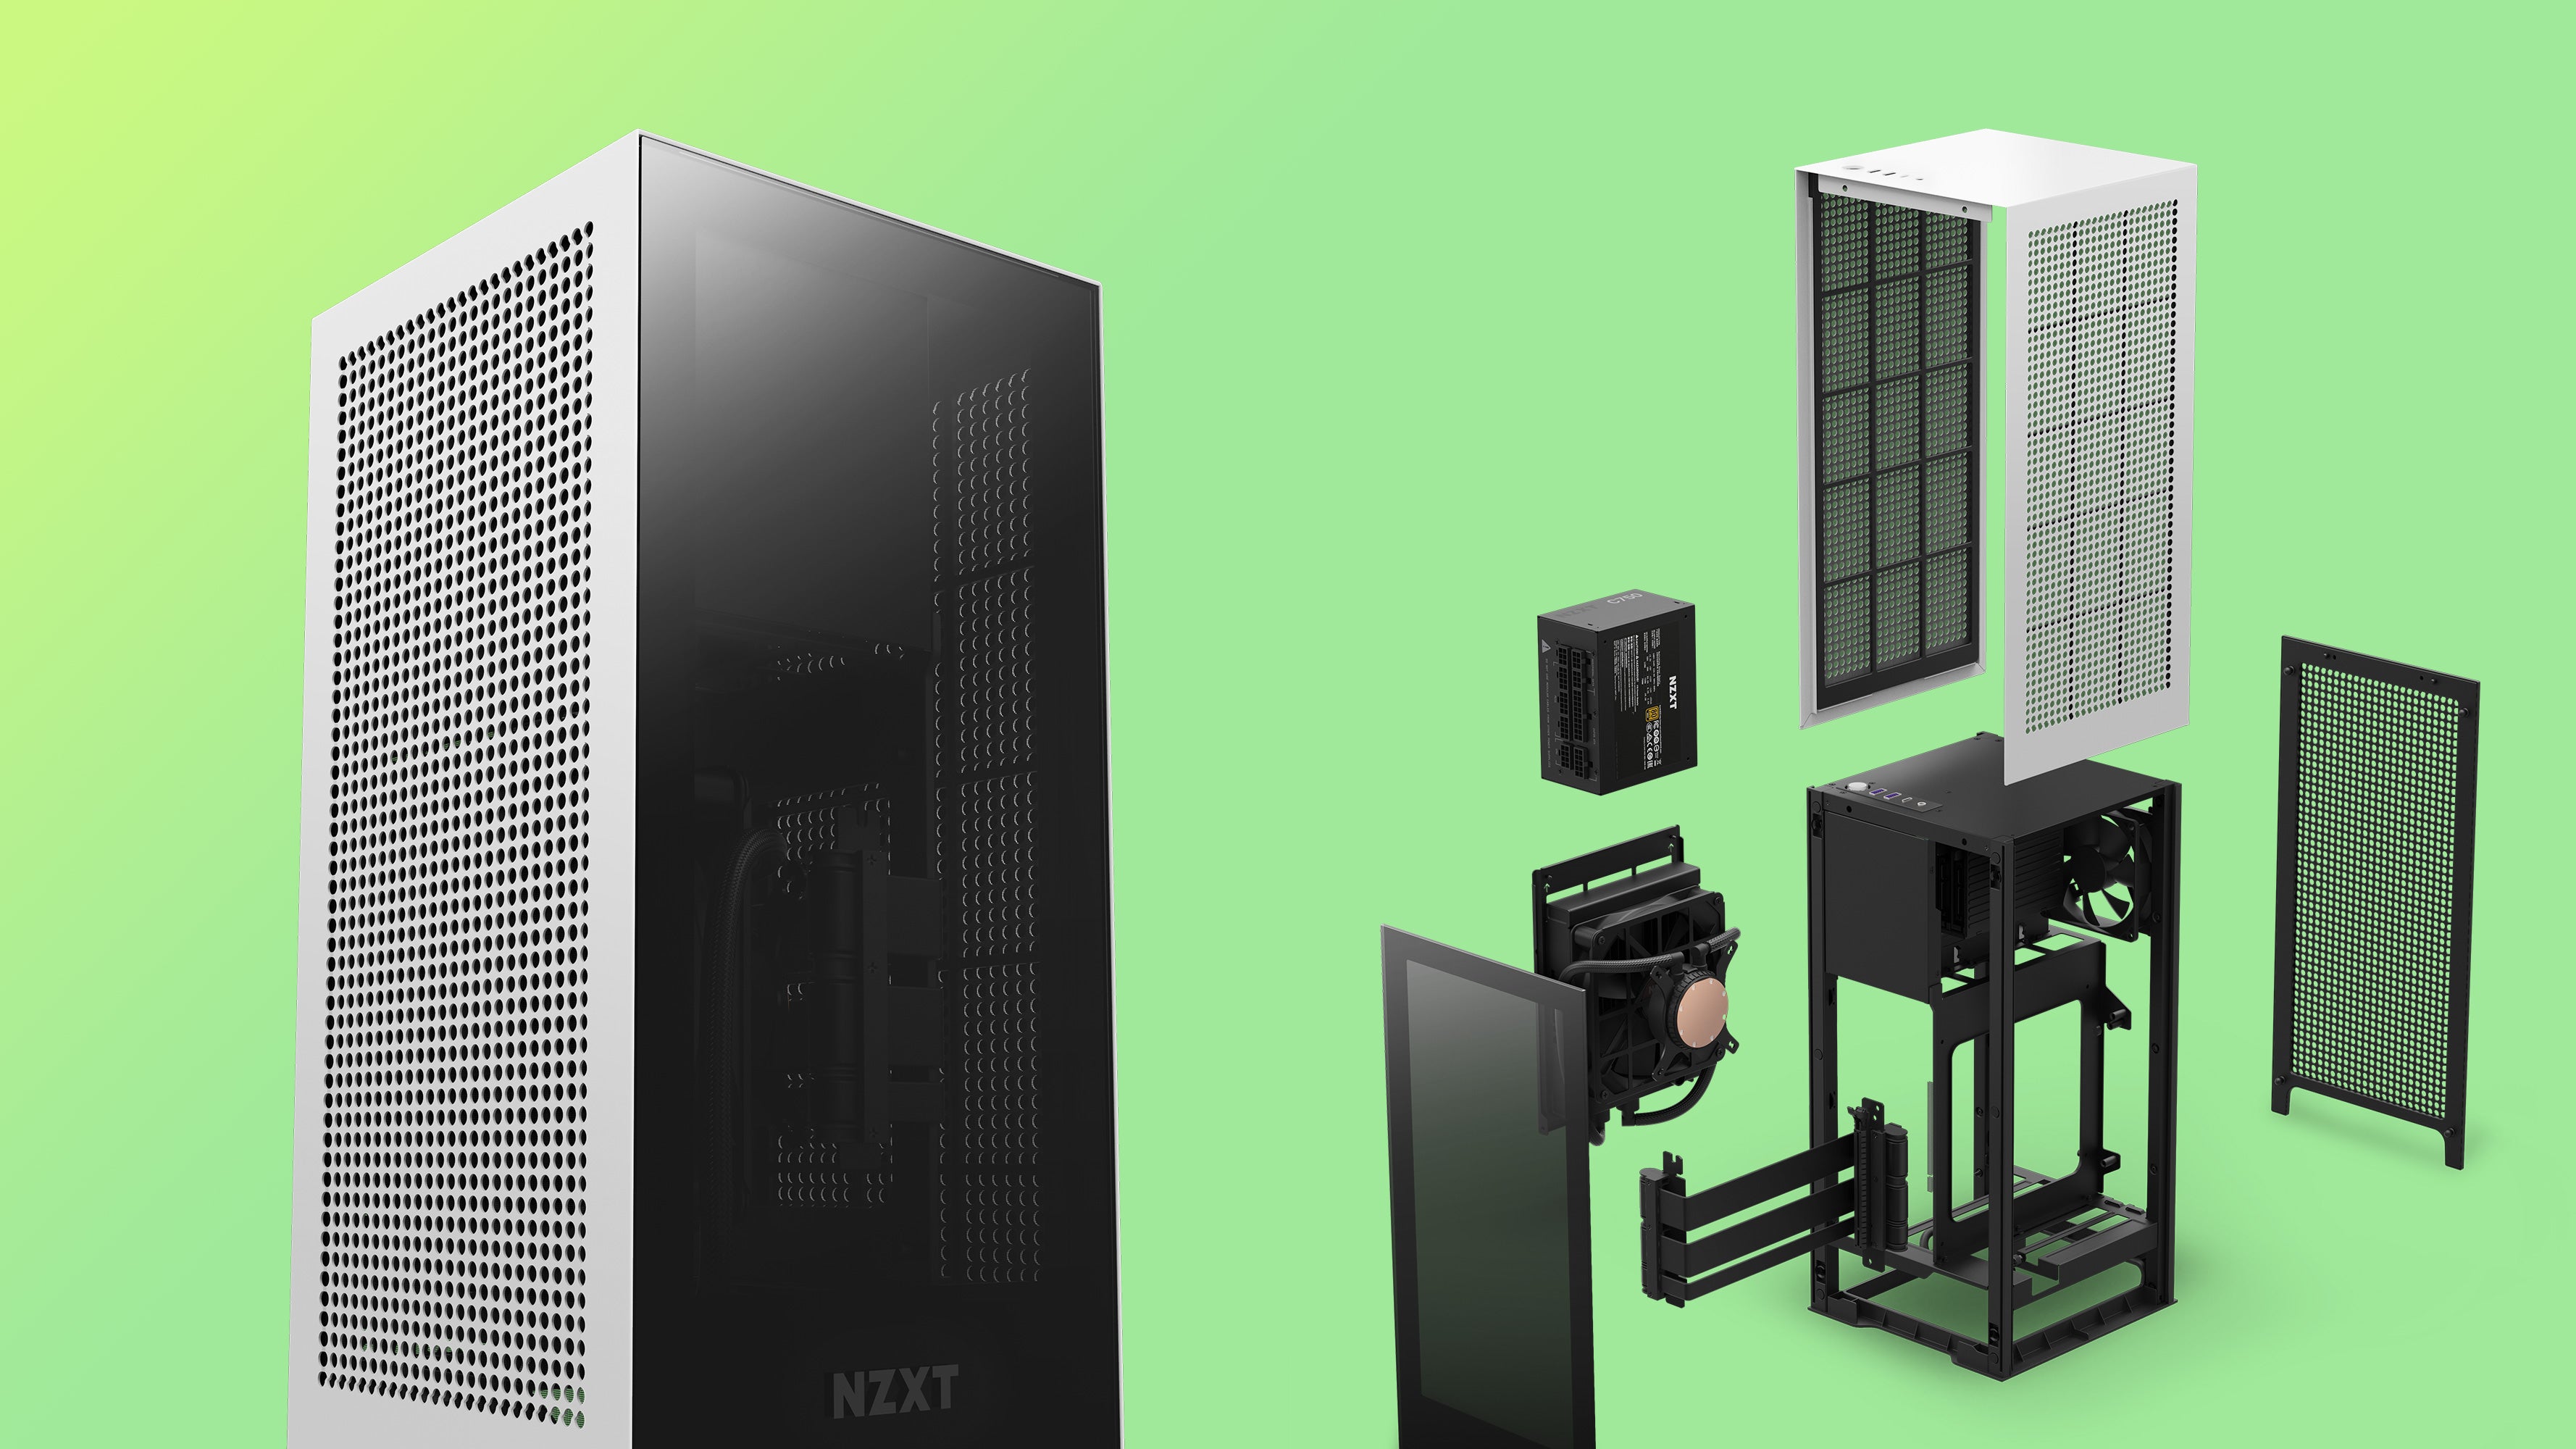 nzxt h1 v2 small form factor itx pc case, shown exploded with an aio liquid cpu cooler, sfx power supply and other components